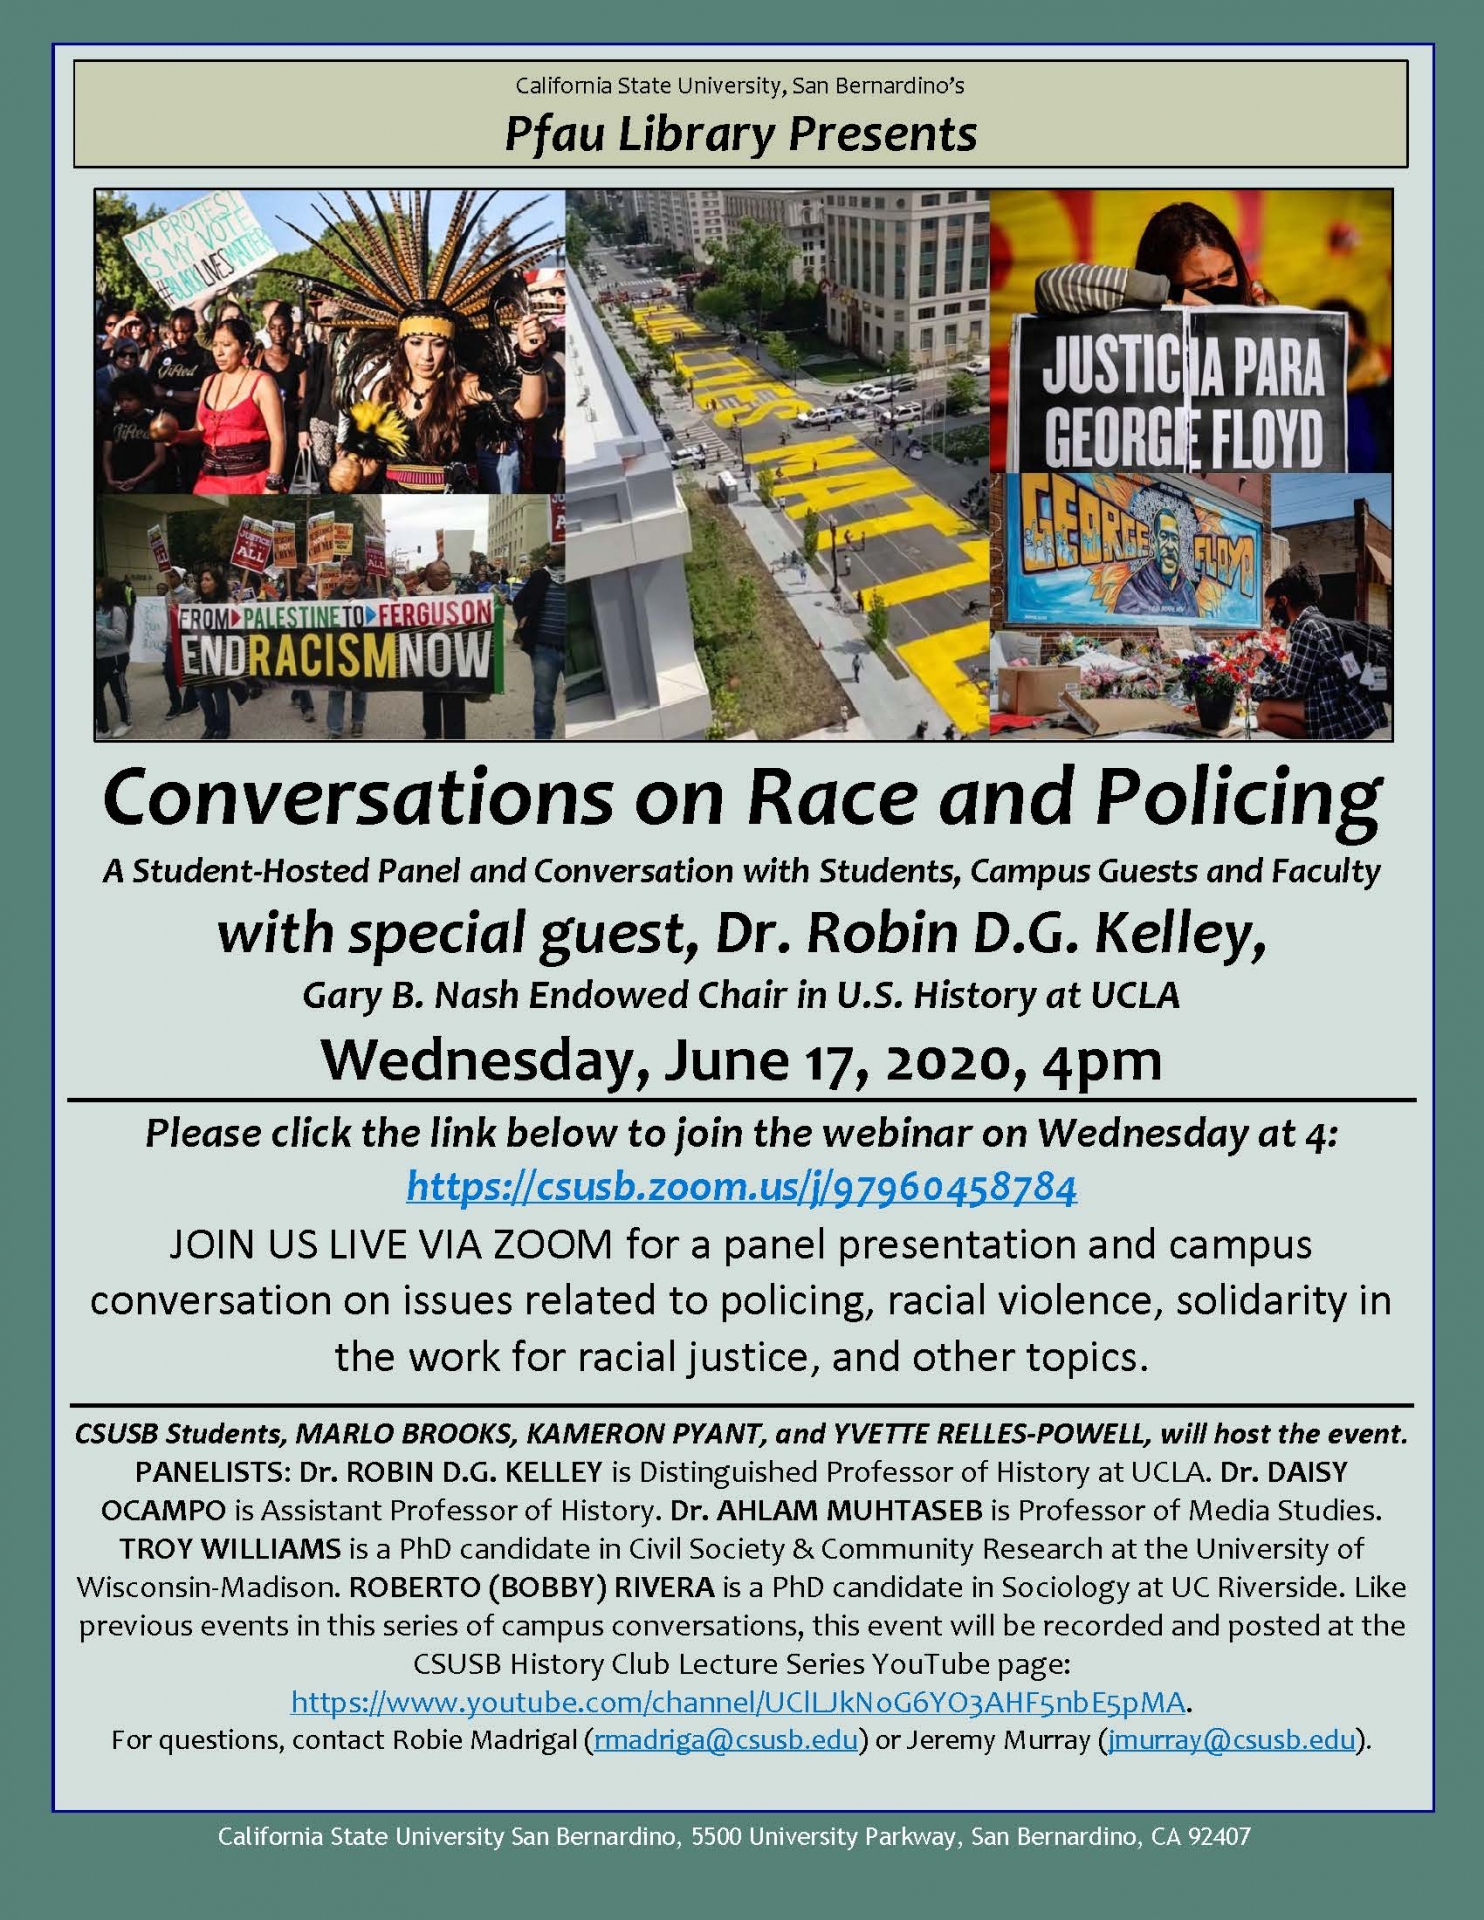 Race and Policing panel flier, June 17 event